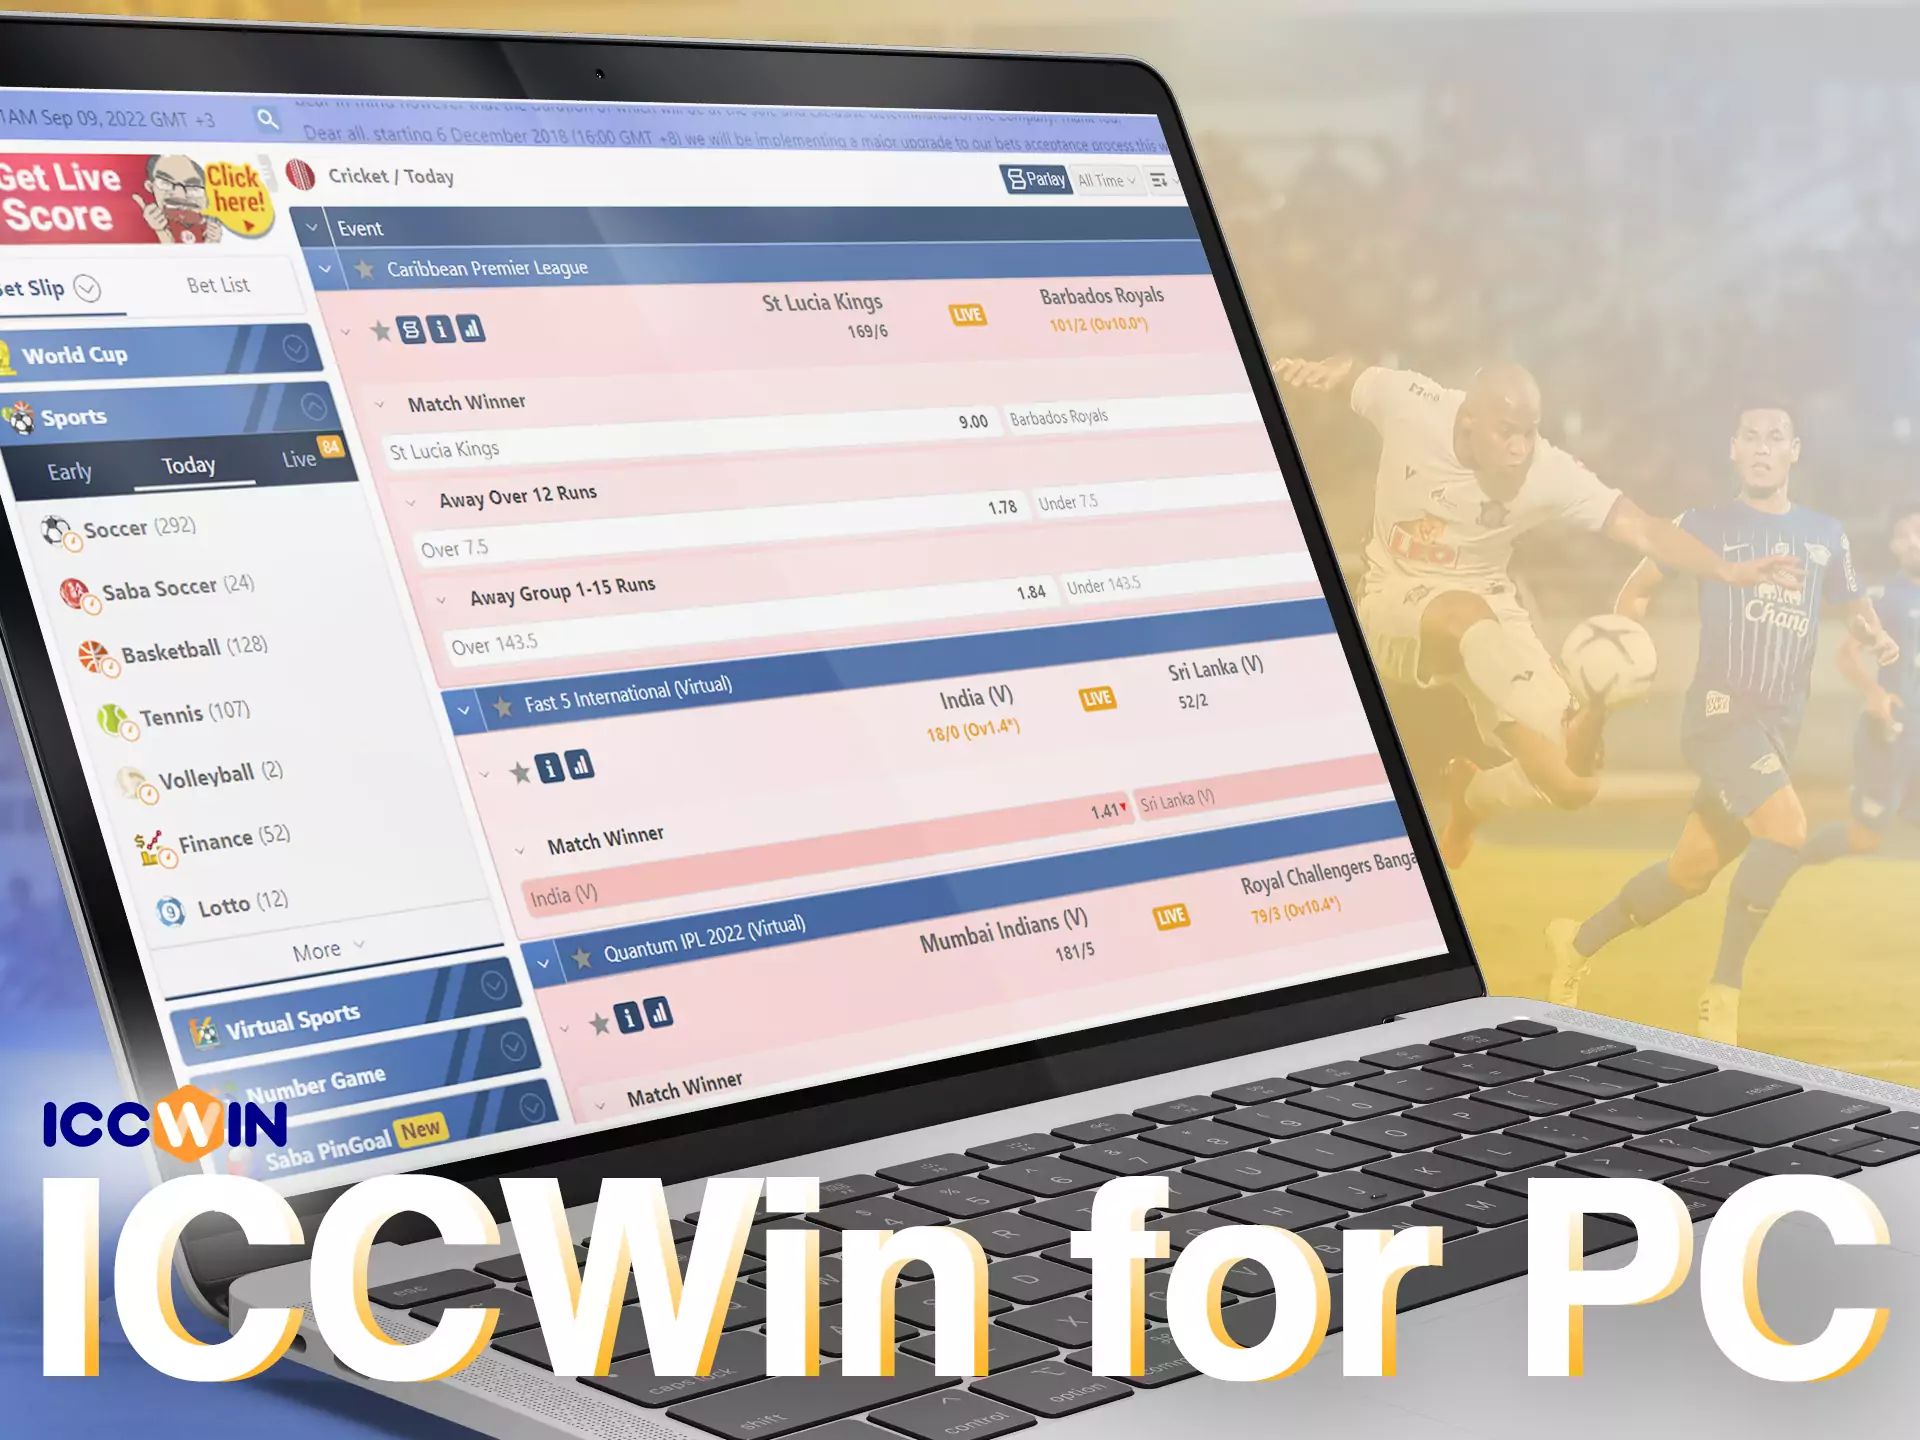 There is no PC client but you can use the ICCWin official website.